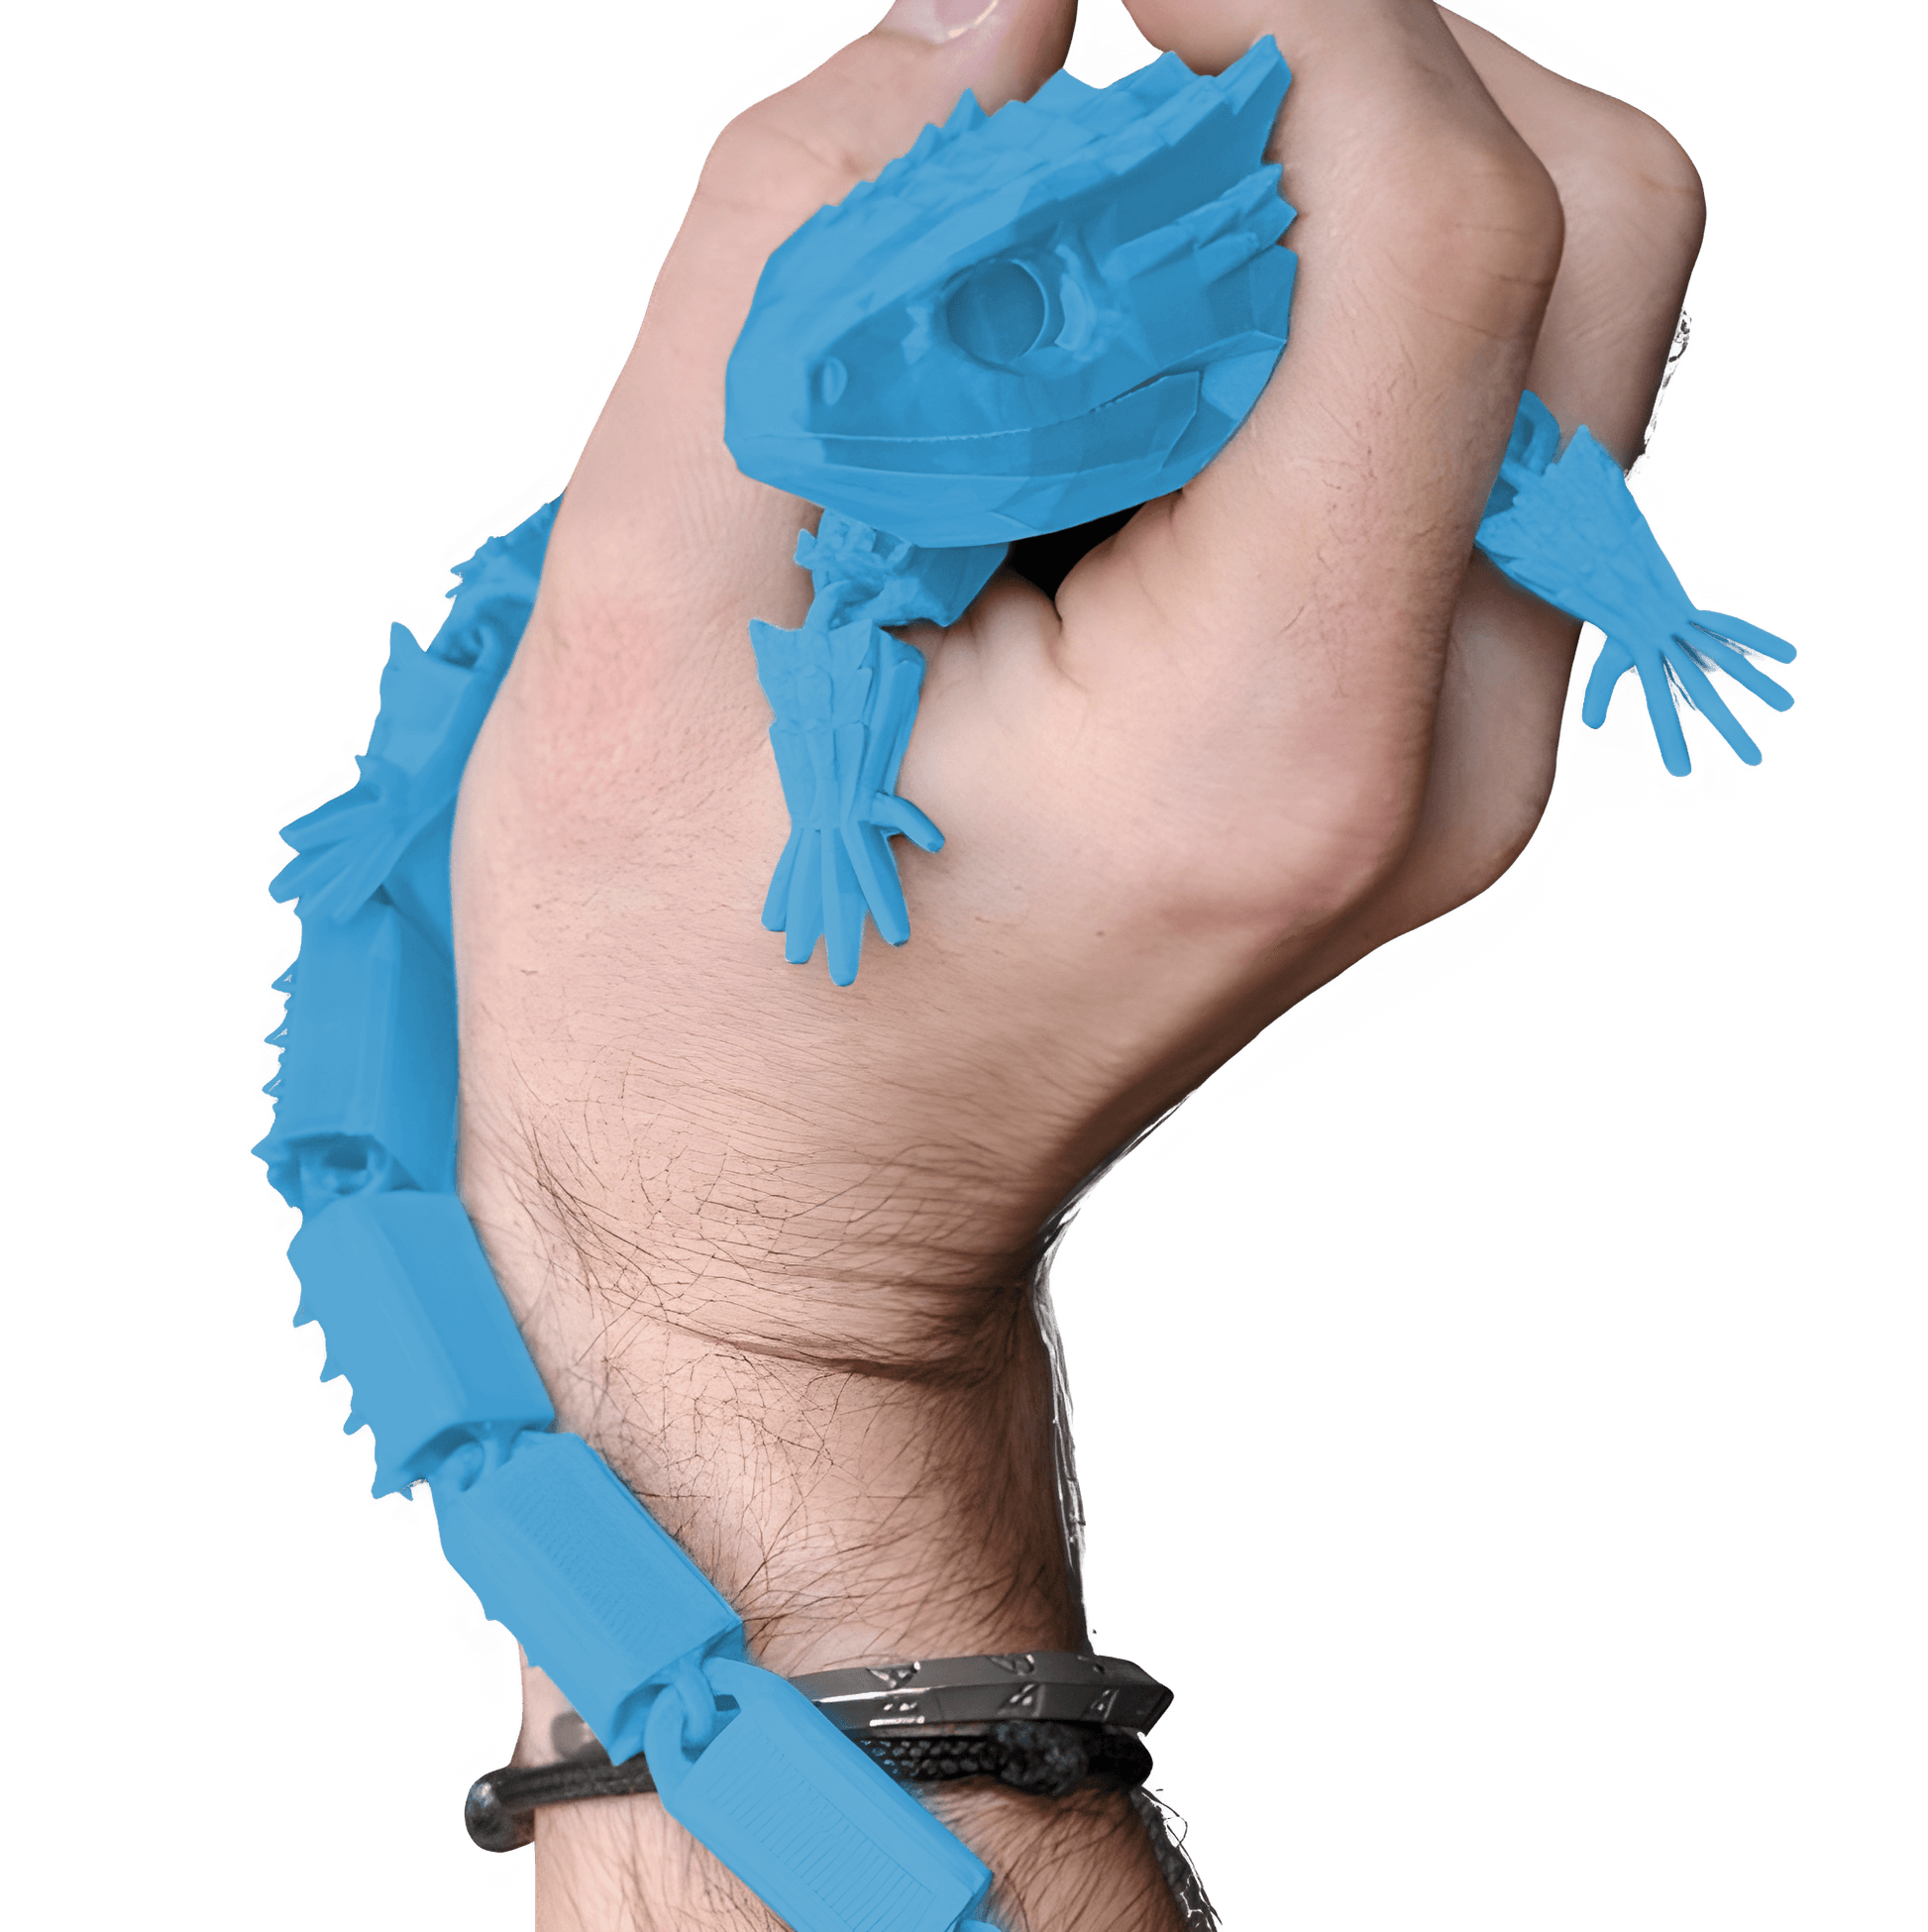 Reptilian Relaxation: 12" Large Lizard Fidget Toy for ADHD Stress Relief - RJW Design Store